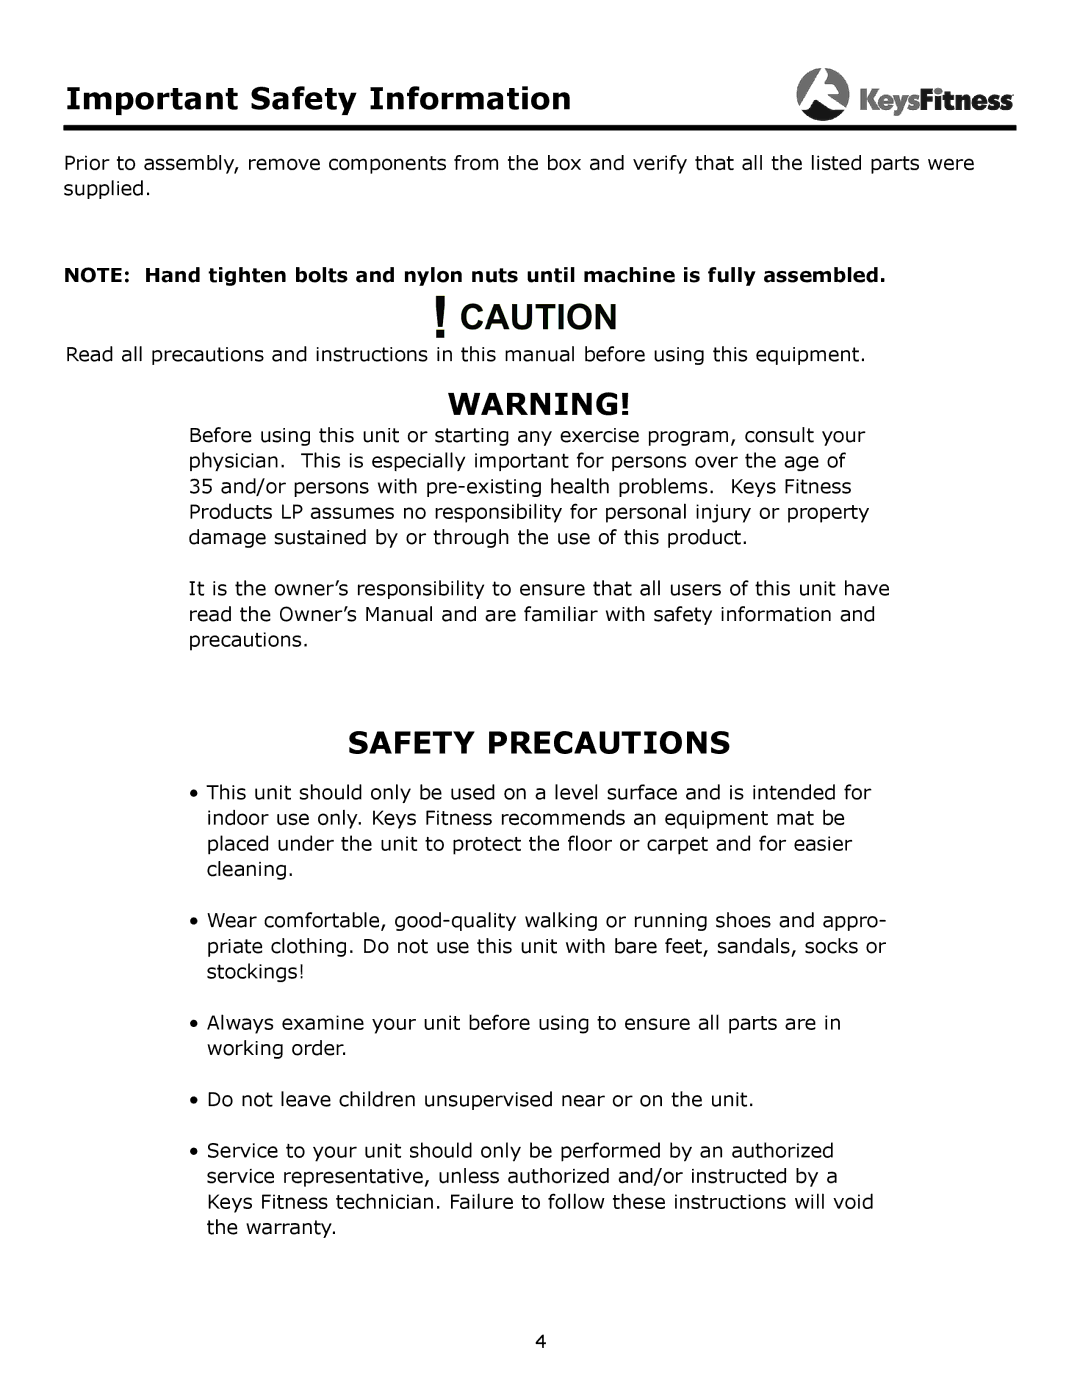 Keys Fitness KF-SPC owner manual Important Safety Information, Safety Precautions 